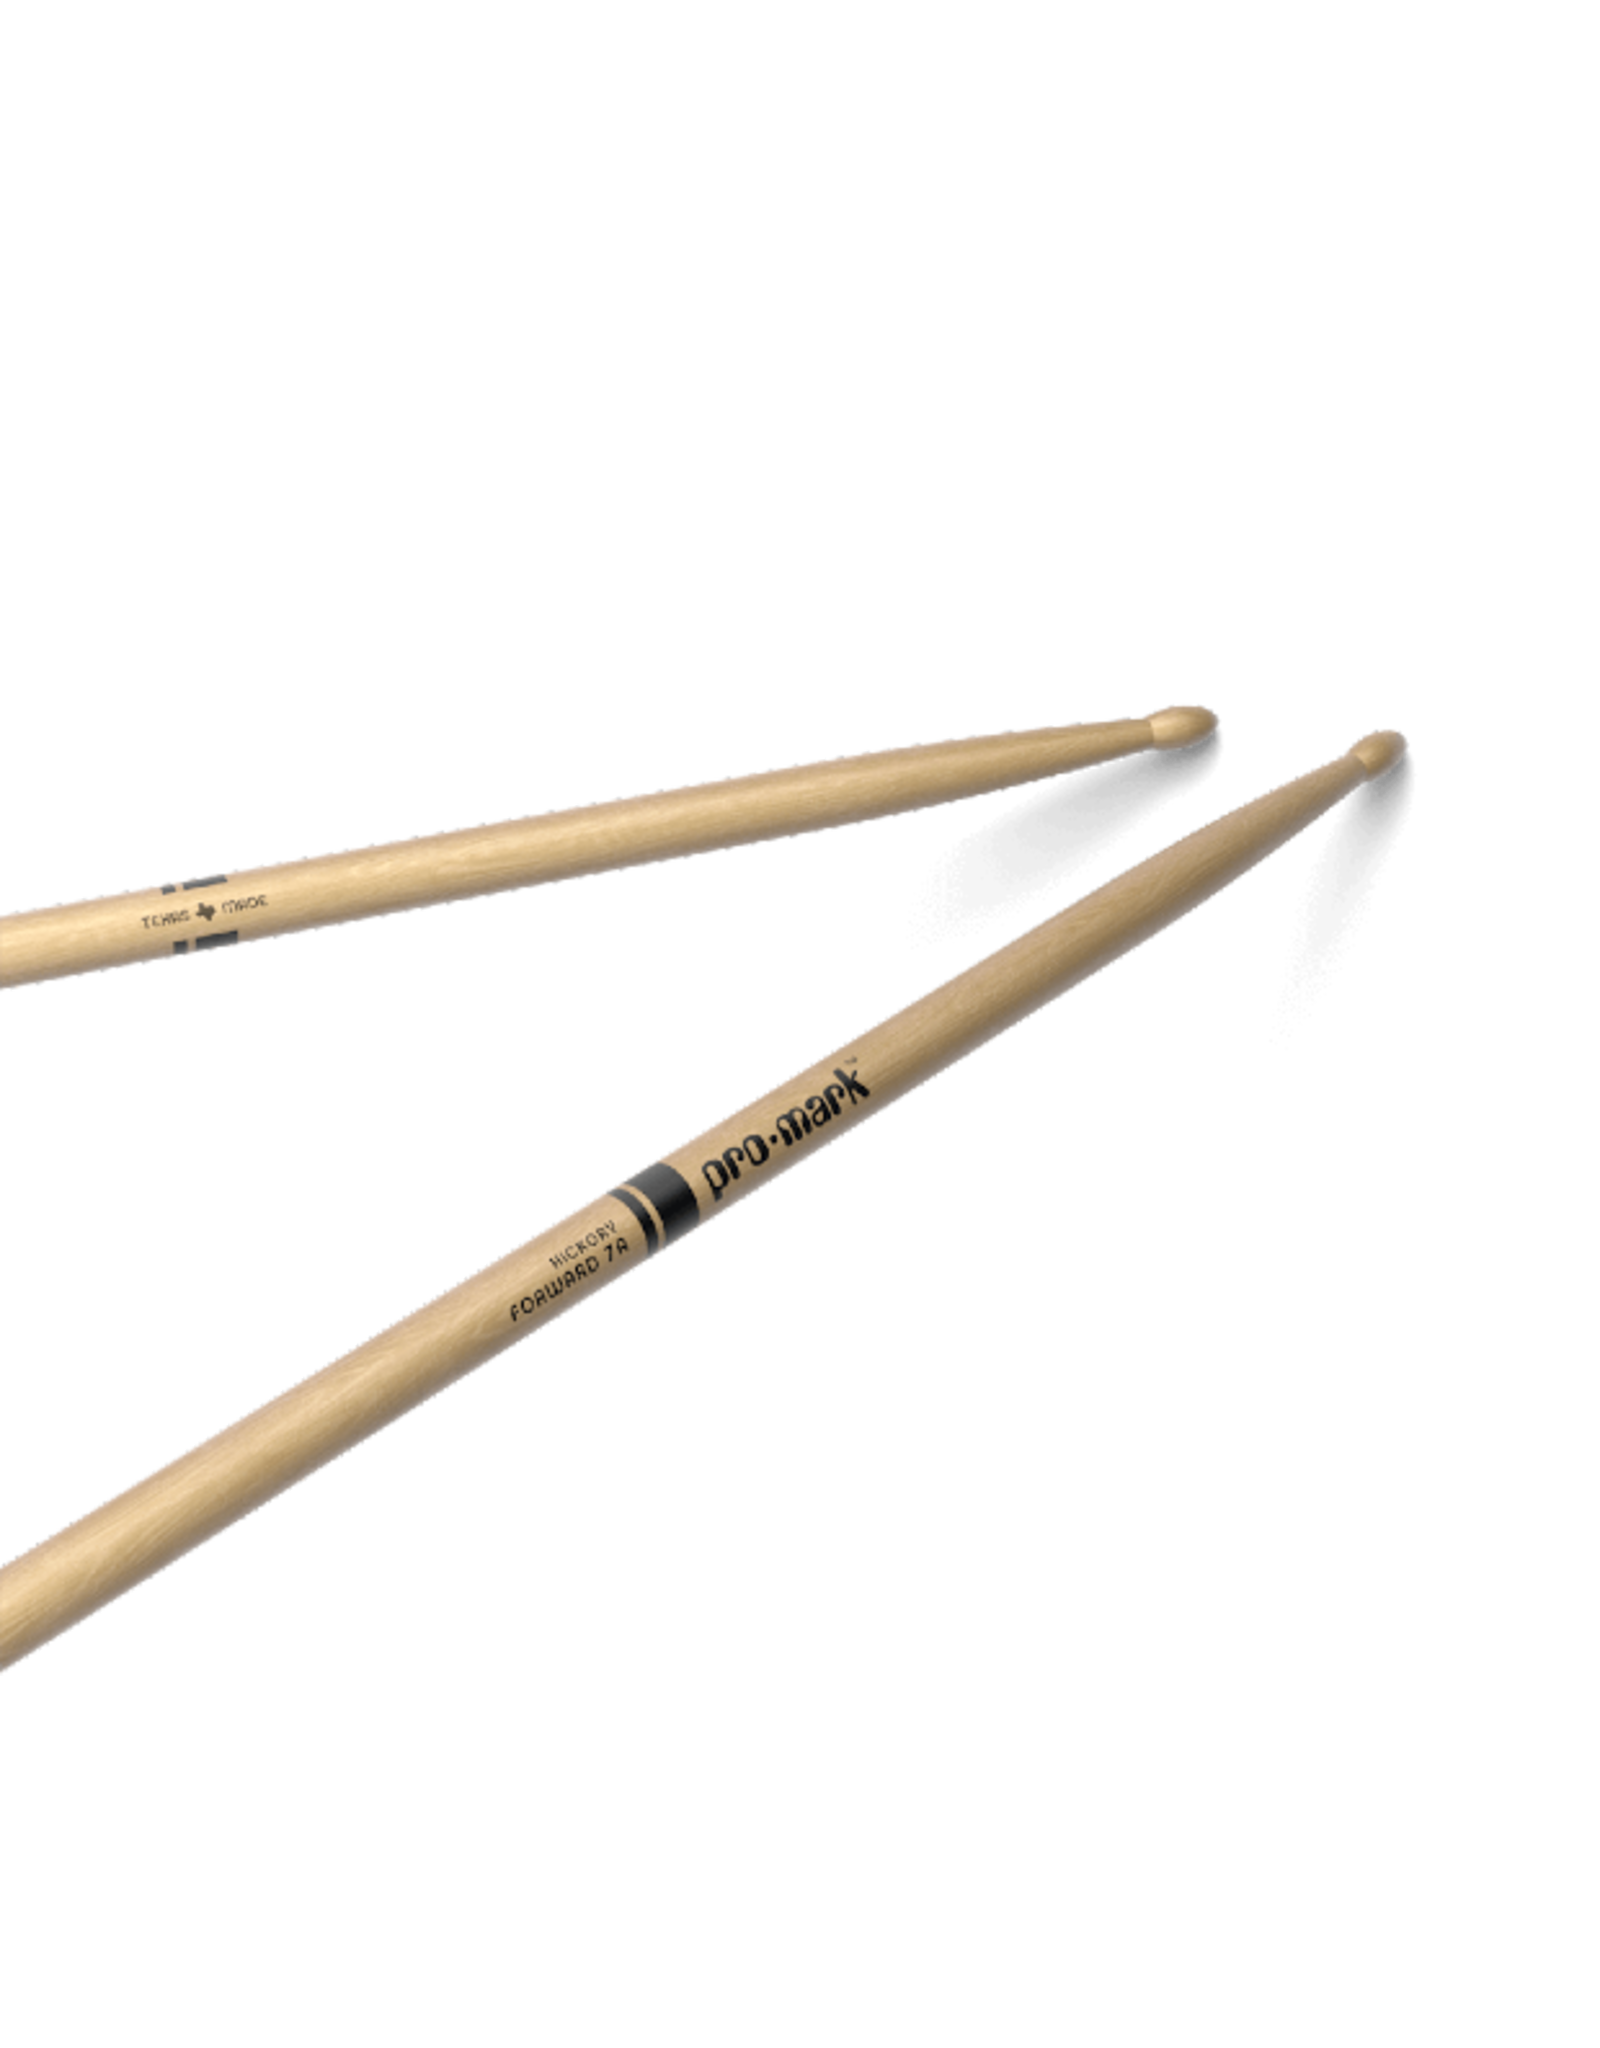 Promark Promark Classic Forward Hickory 7A Oval Wood Tip Drumstick